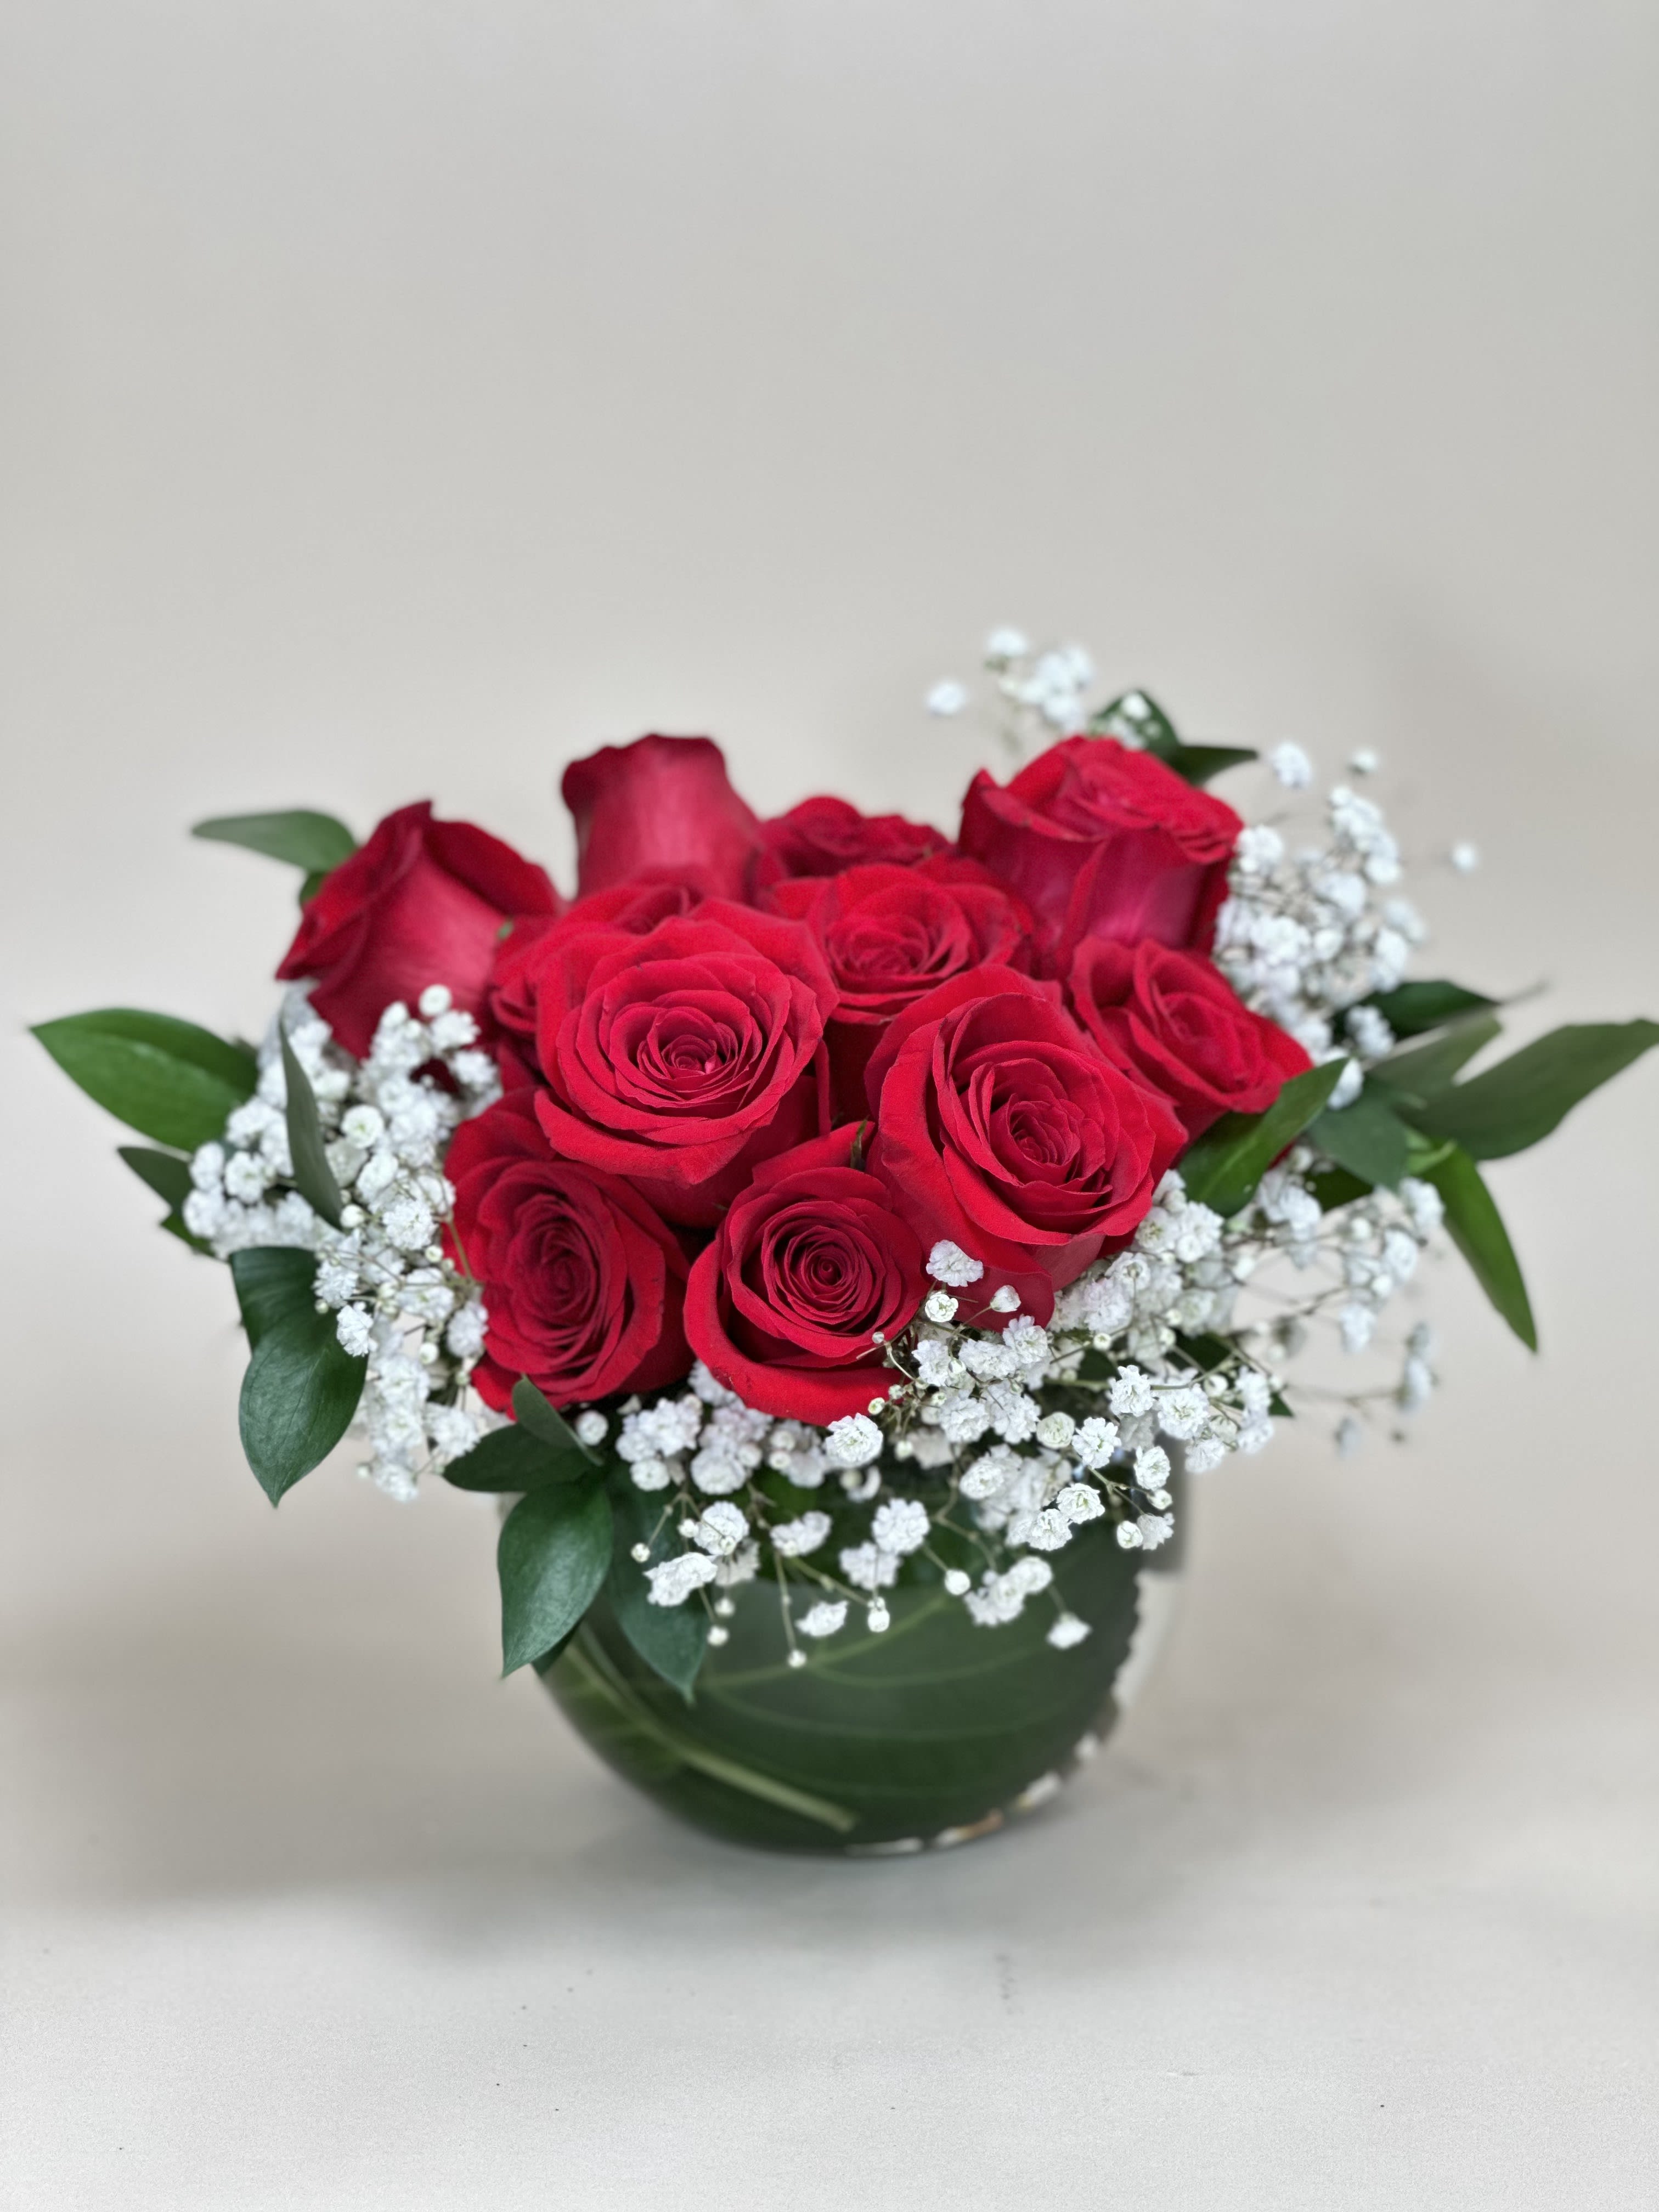 Season of Heart - Offer what you feel in your heart to someone, today. (12 Roses) Arrangement will be in a clear glass vase.